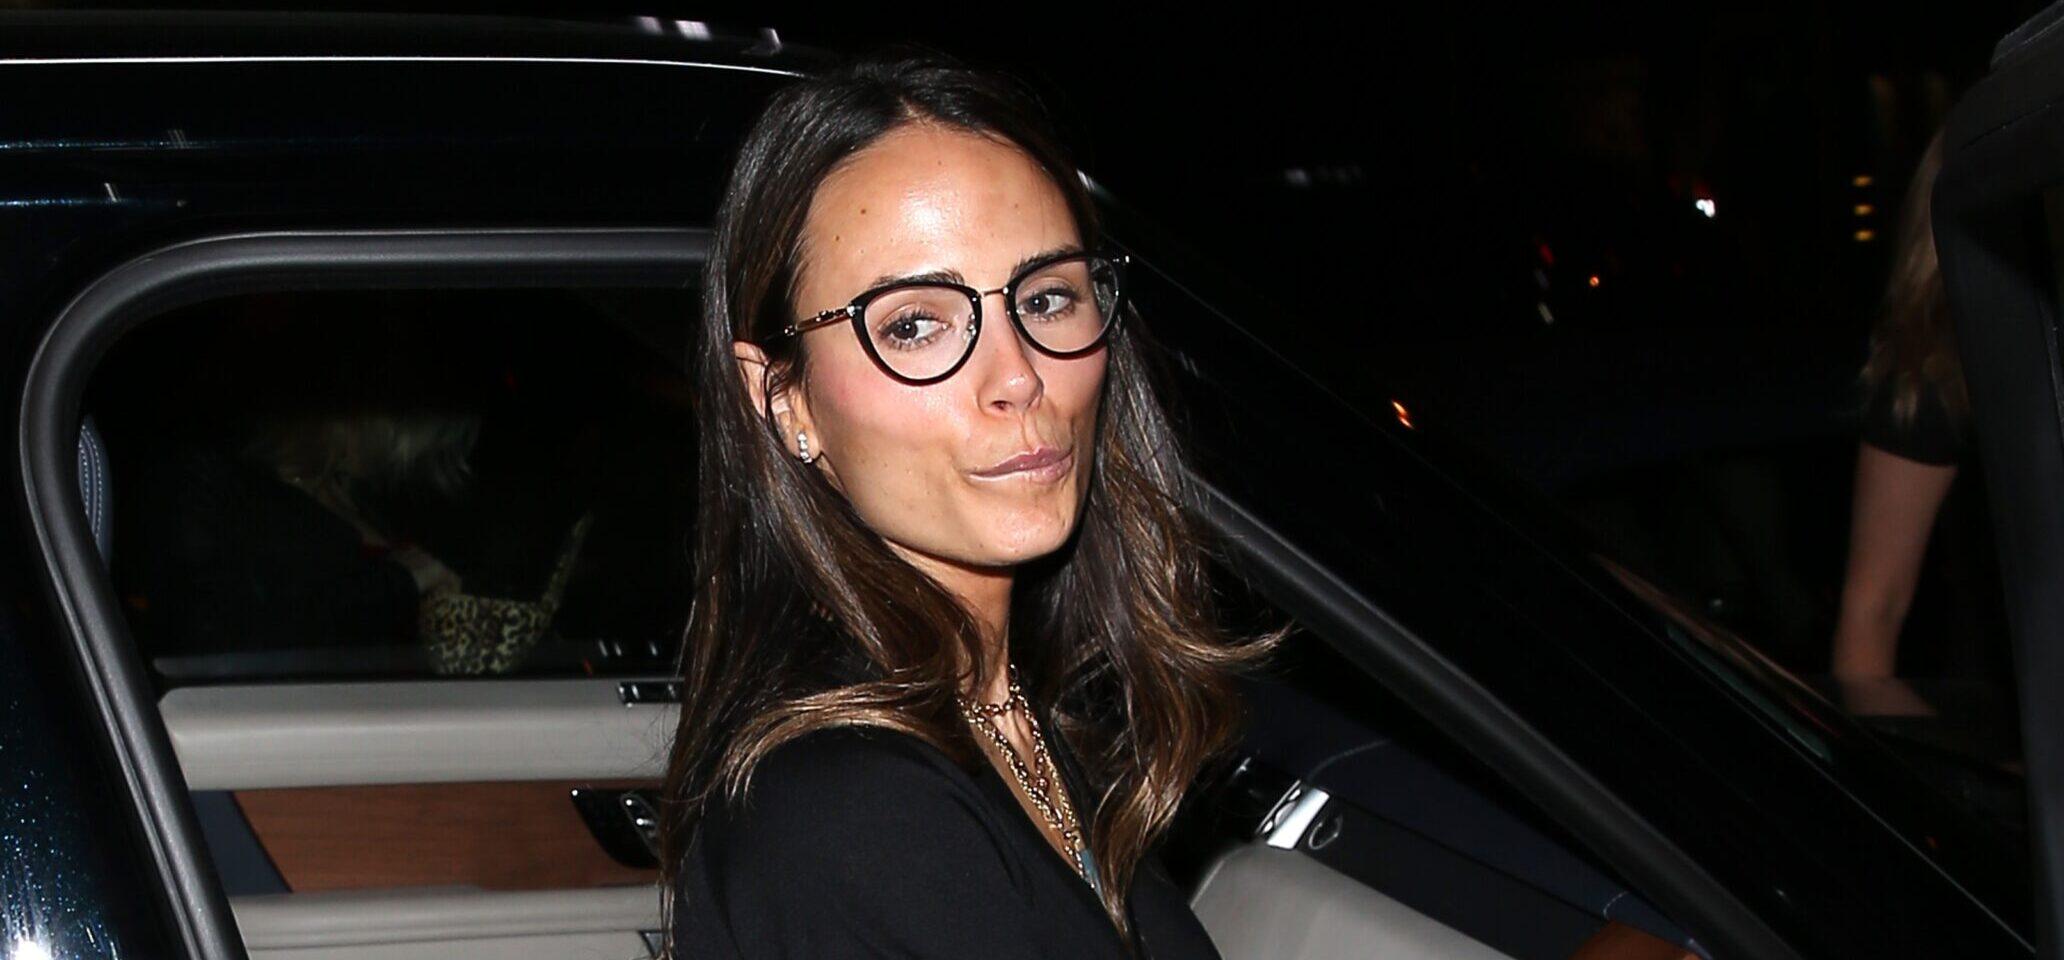 Jordana Brewster looked pretty in pink while leaving dinner at apos Craigs apos Restaurant in West Hollywood CA